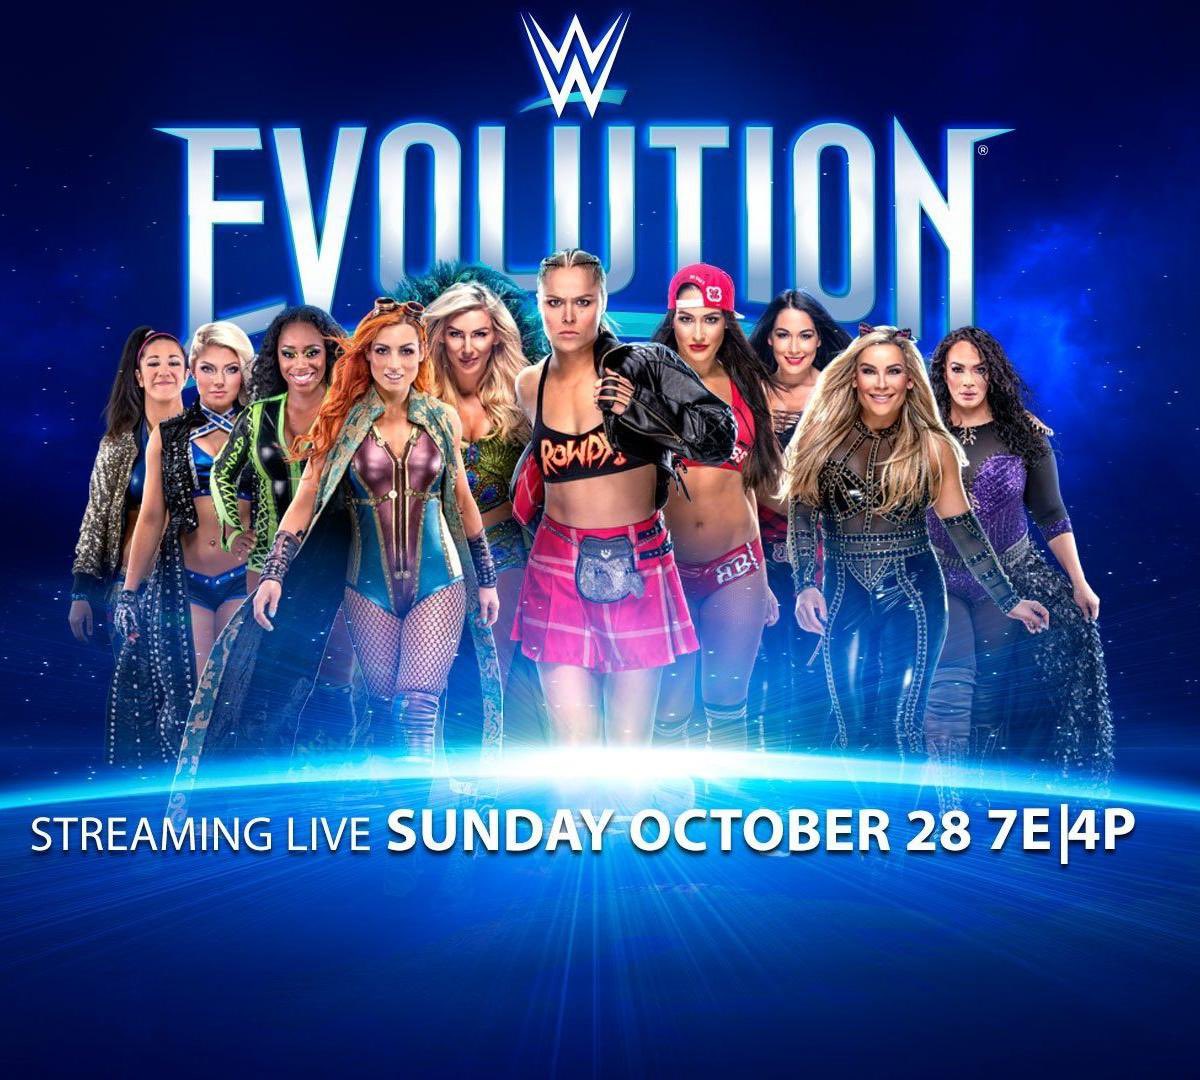 3 years ago today WWE Evolution took place as the companies first ever all women’s pay-per-view!! The main event featured Ronda Rousey successfully defending her #RAW Women’s title VS Nikki Bella! #WWE https://t.co/BrCAZE4rXx